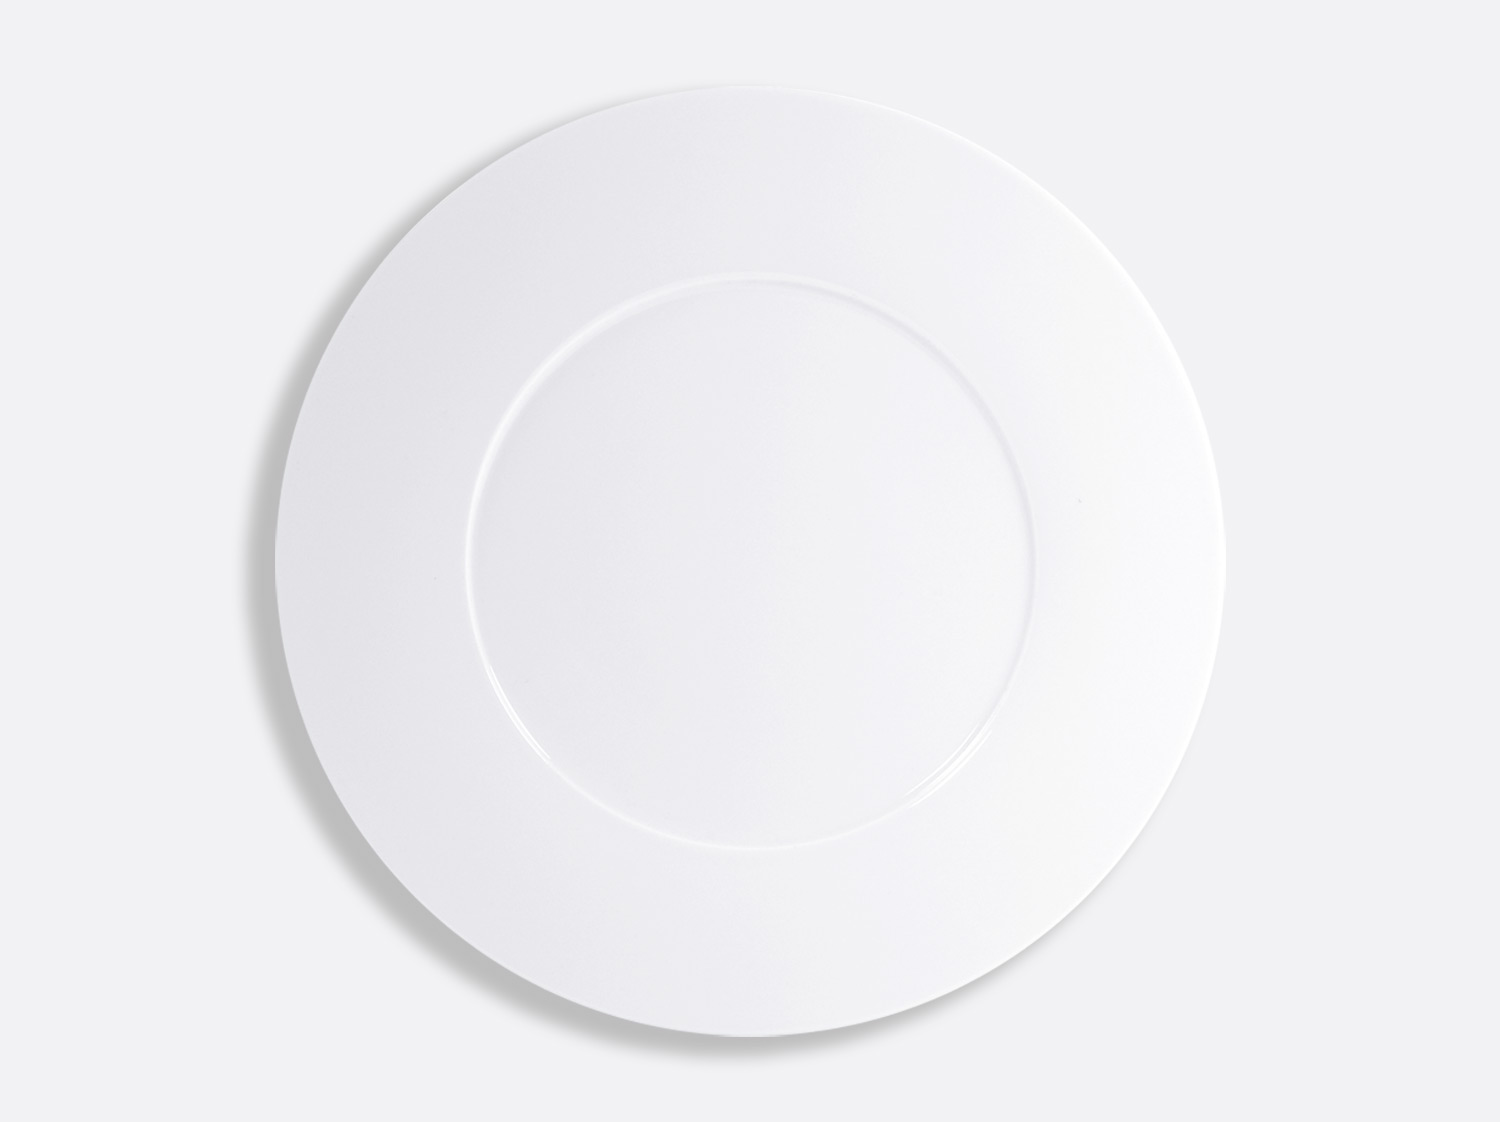 China Plate 31 cm of the collection Astre blanc | Bernardaud